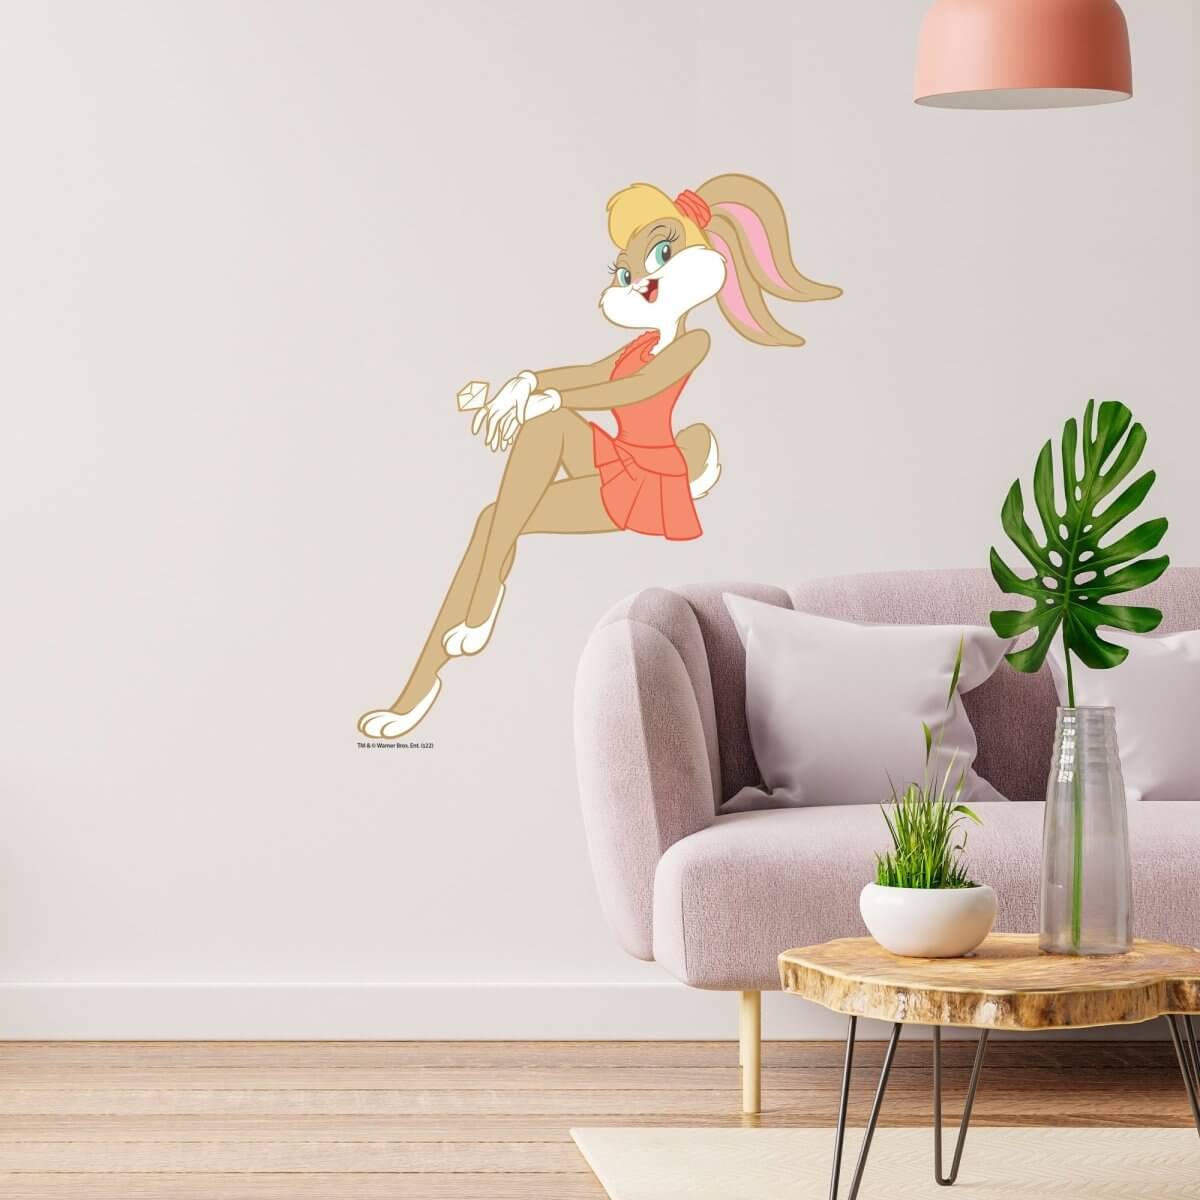 Kismet Decals Looney Tunes Lola Bunny Pretty Pose Licensed Wall Sticker - Easy DIY Home & Kids Room Decor Wall Decal Art - Kismet Decals